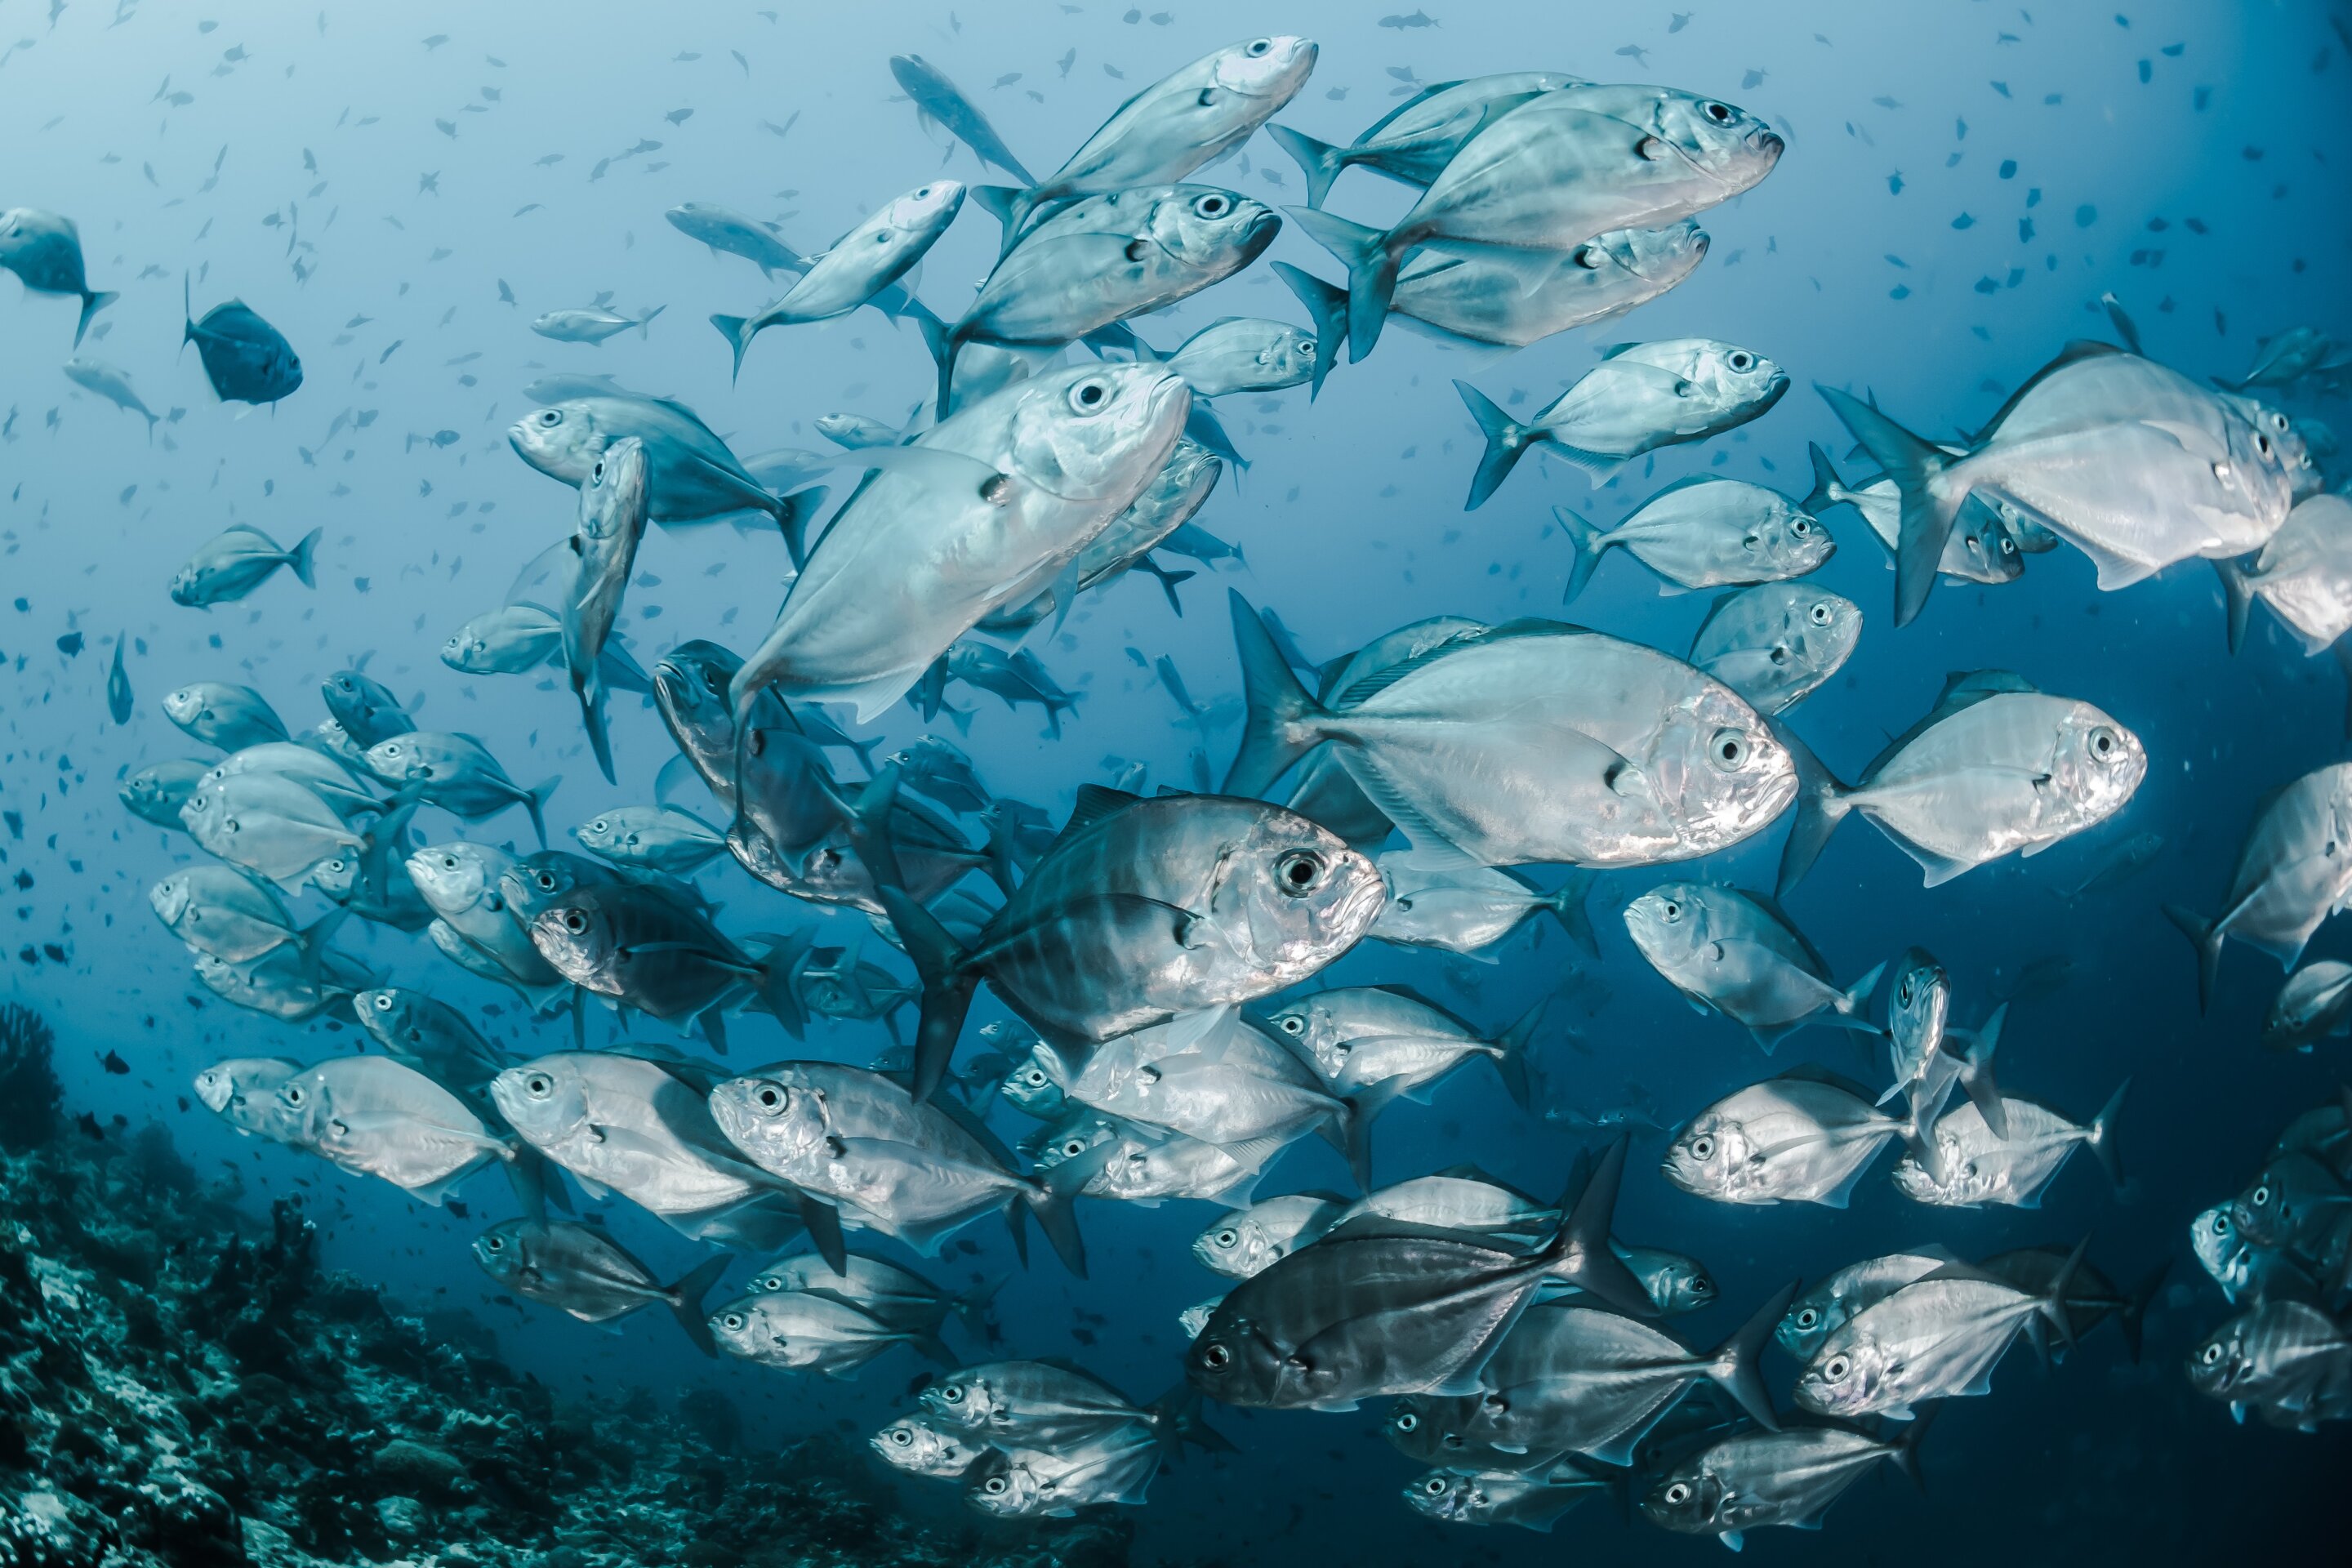 Marine fish are responding to ocean warming by relocating towards the poles